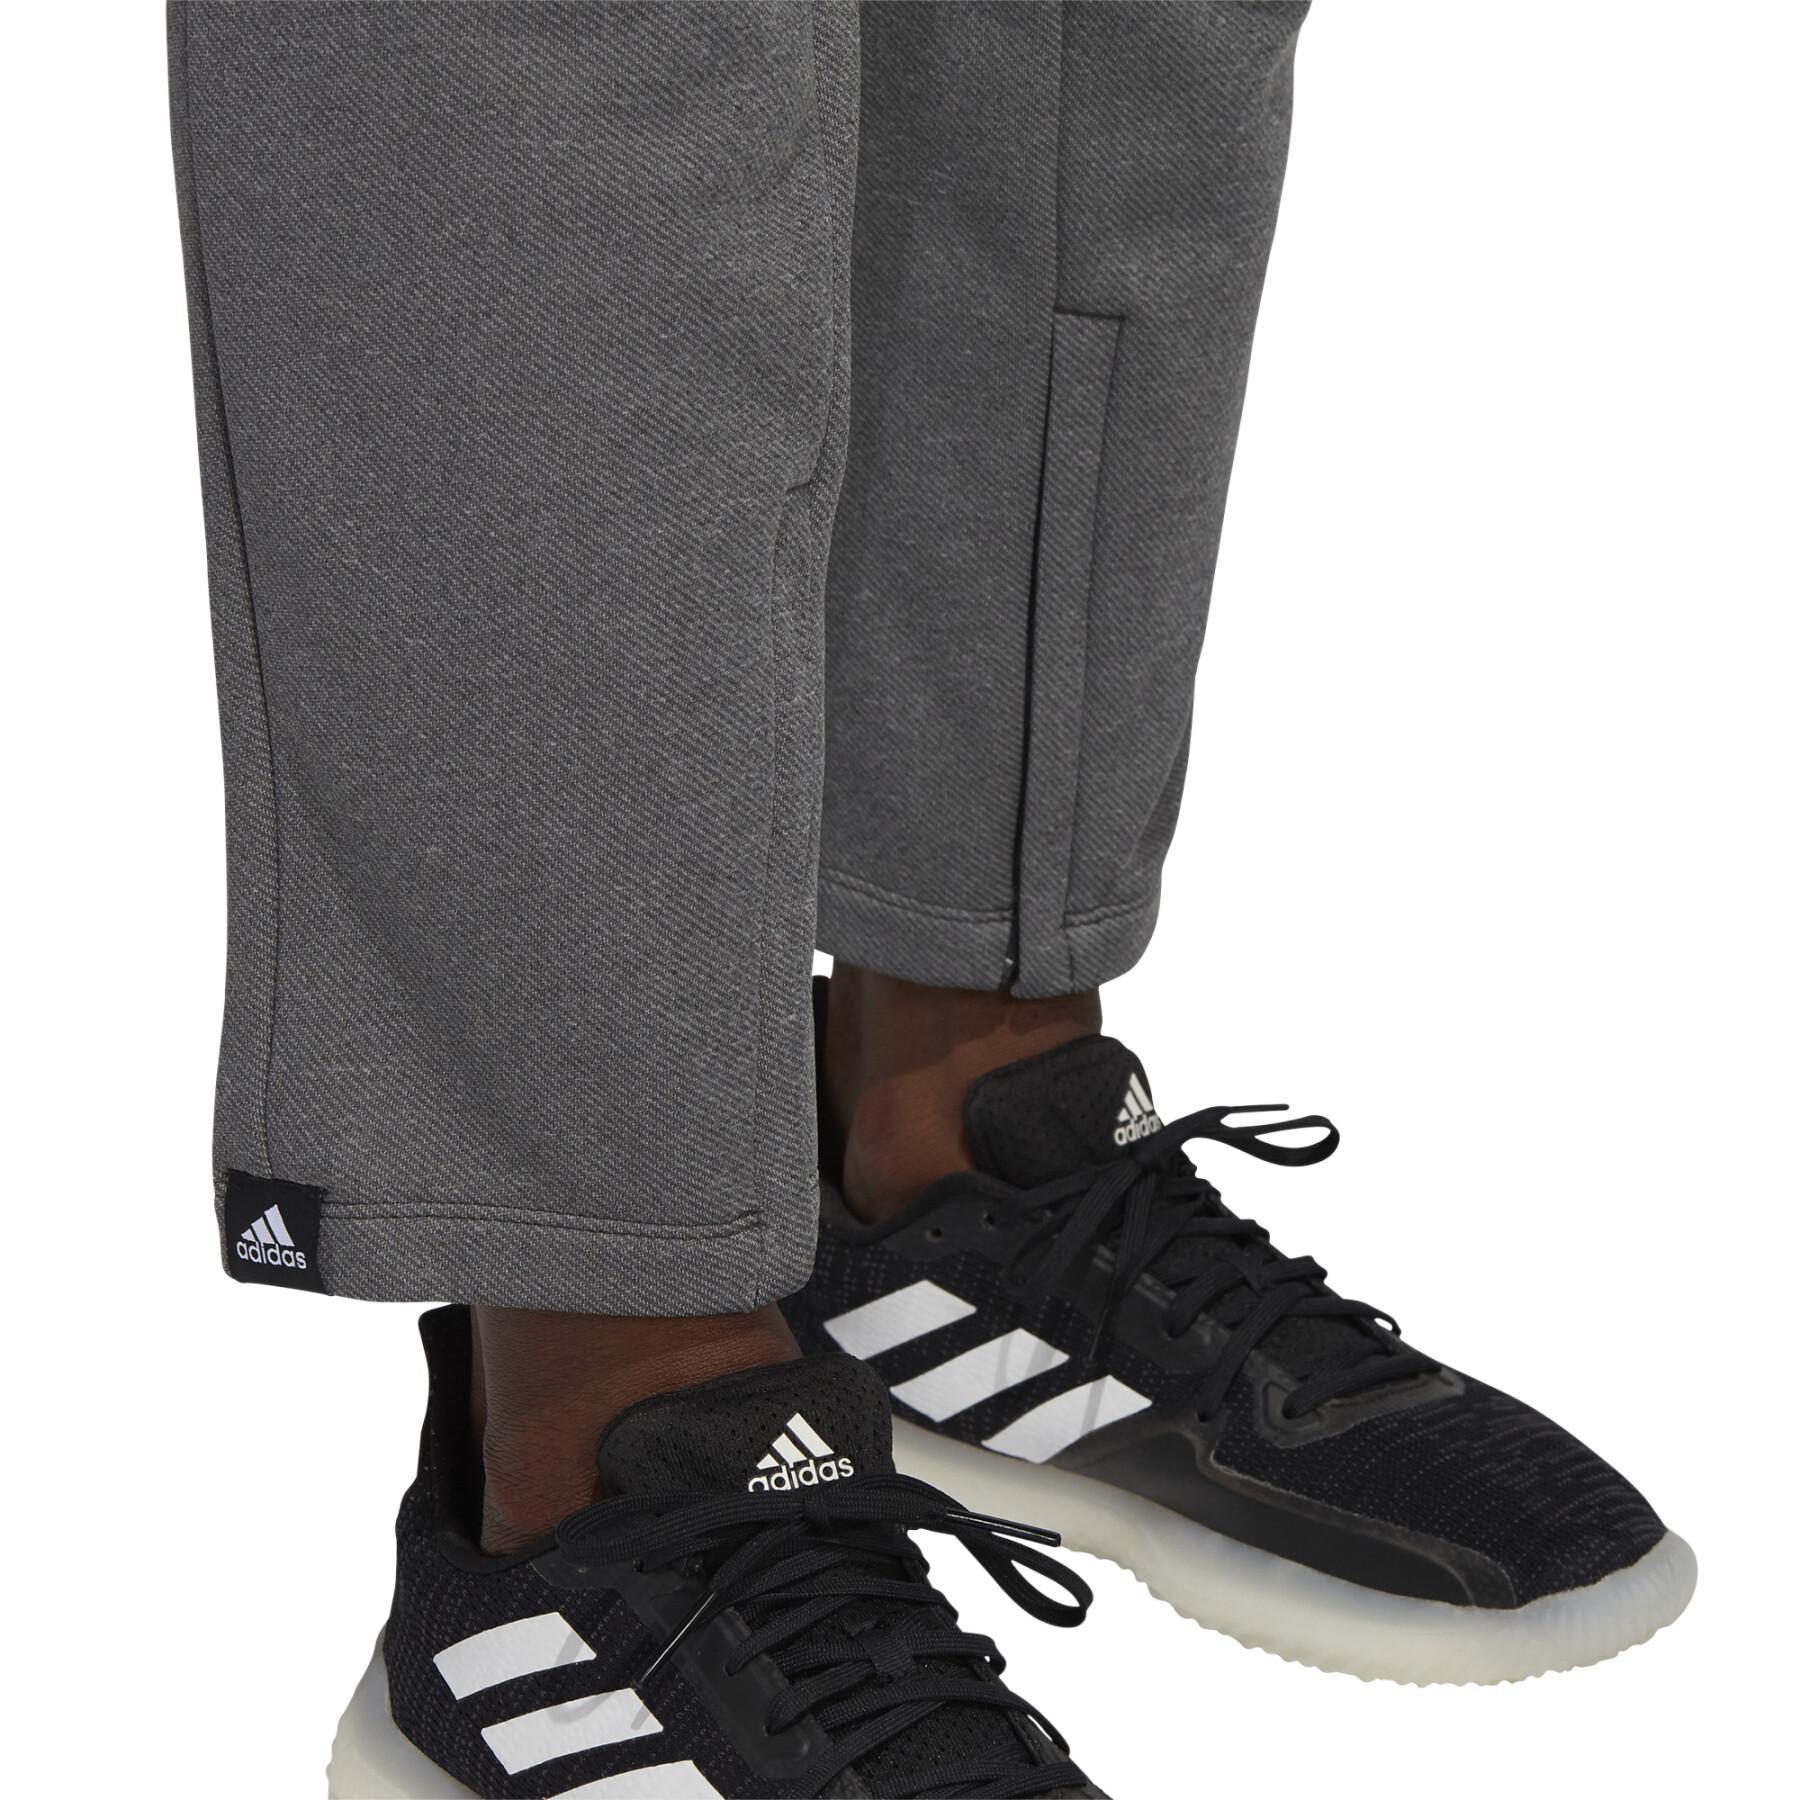 Pantalones adidas Game And Go Tappered